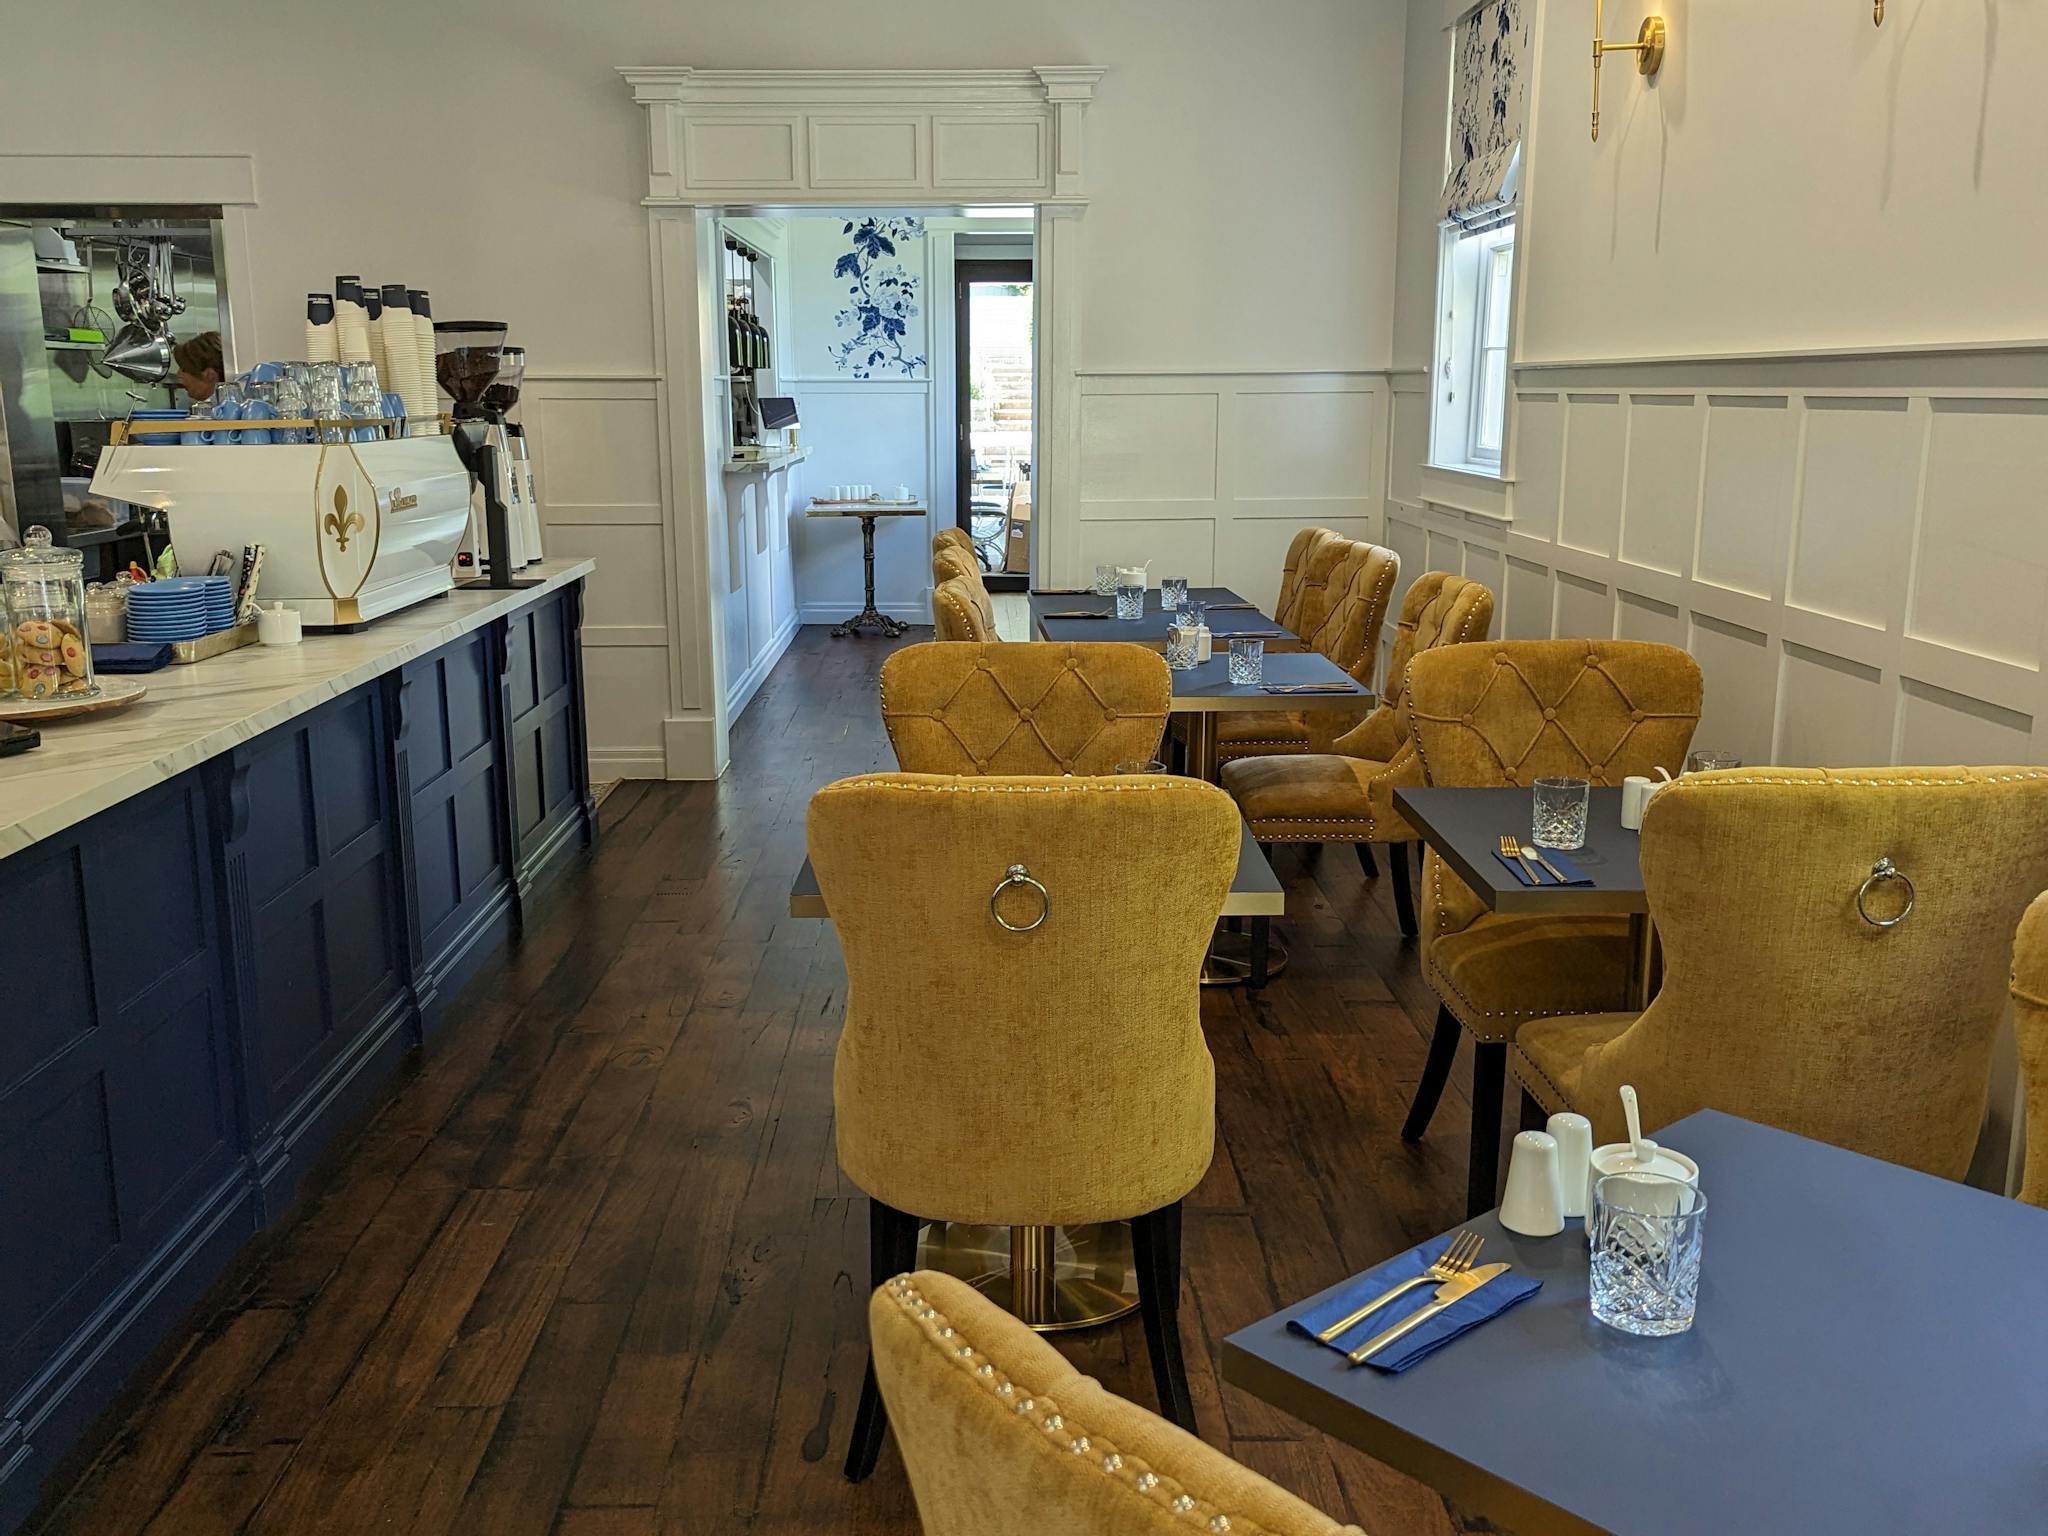 Dark timber tables and cushioned yellow dining chairs in the cafes front room. The counter is blue .